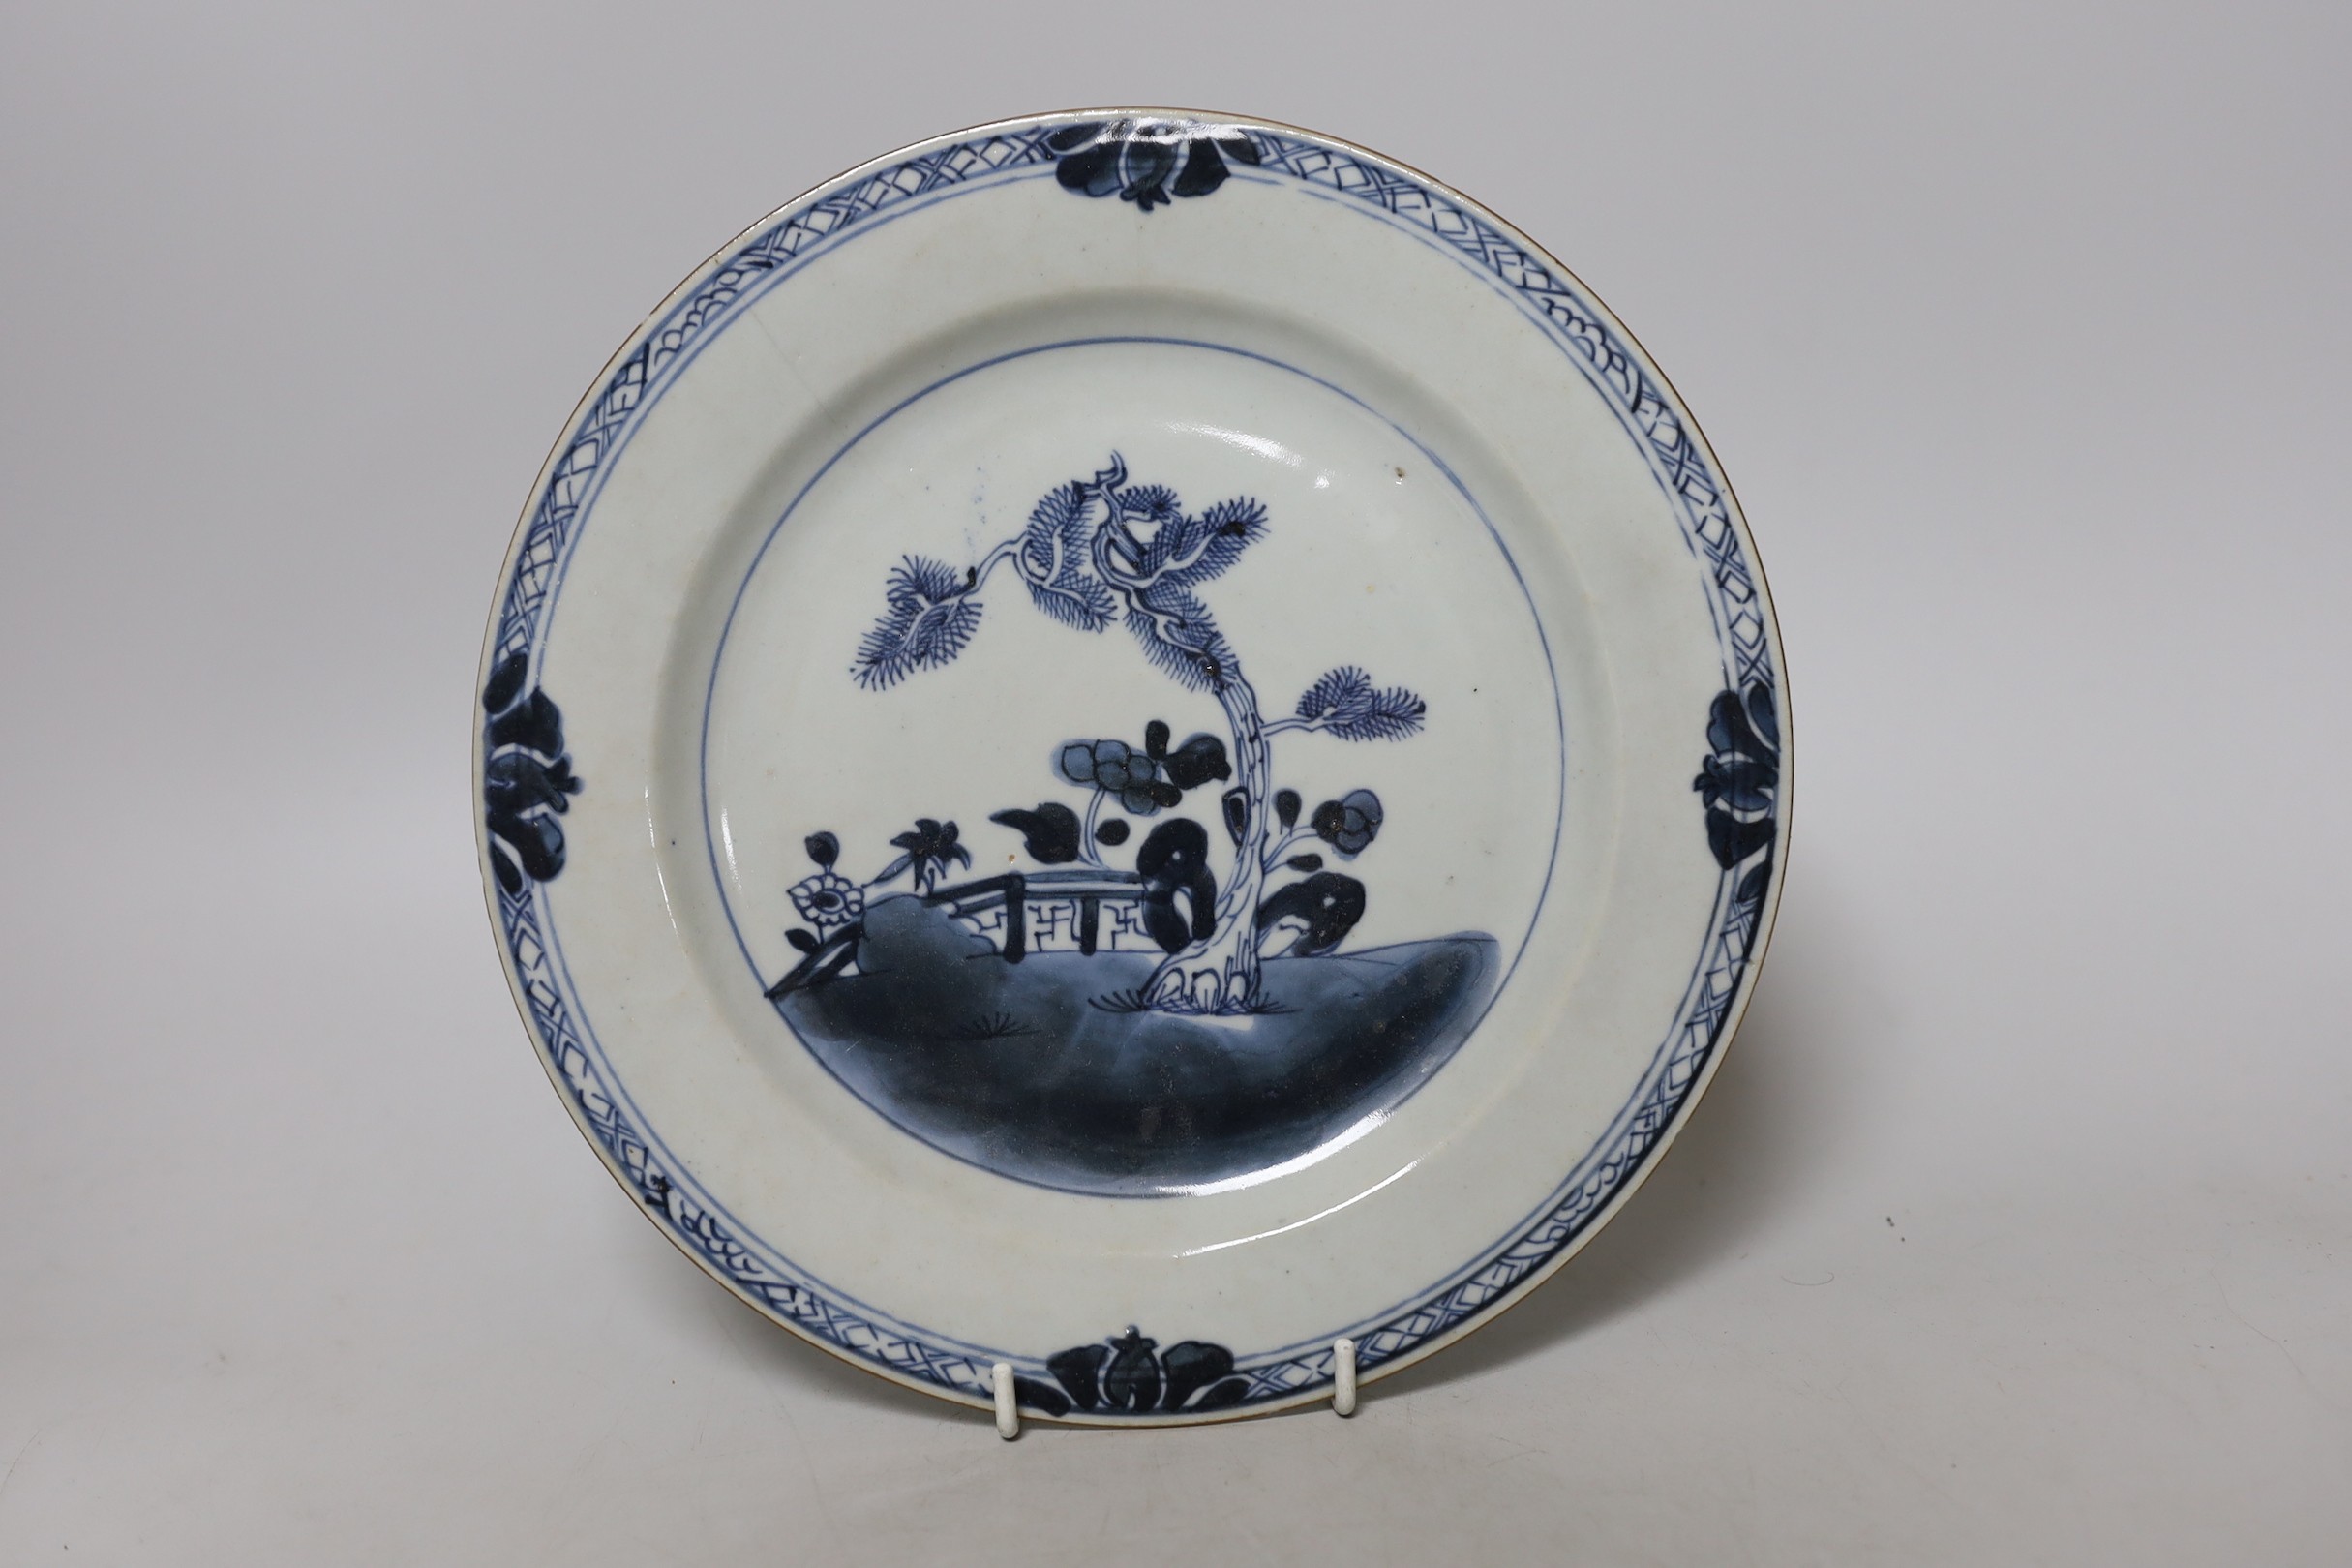 An 18th century Chinese blue and white plate, together with a cloisonné enamel dragon vase and a - Image 6 of 7